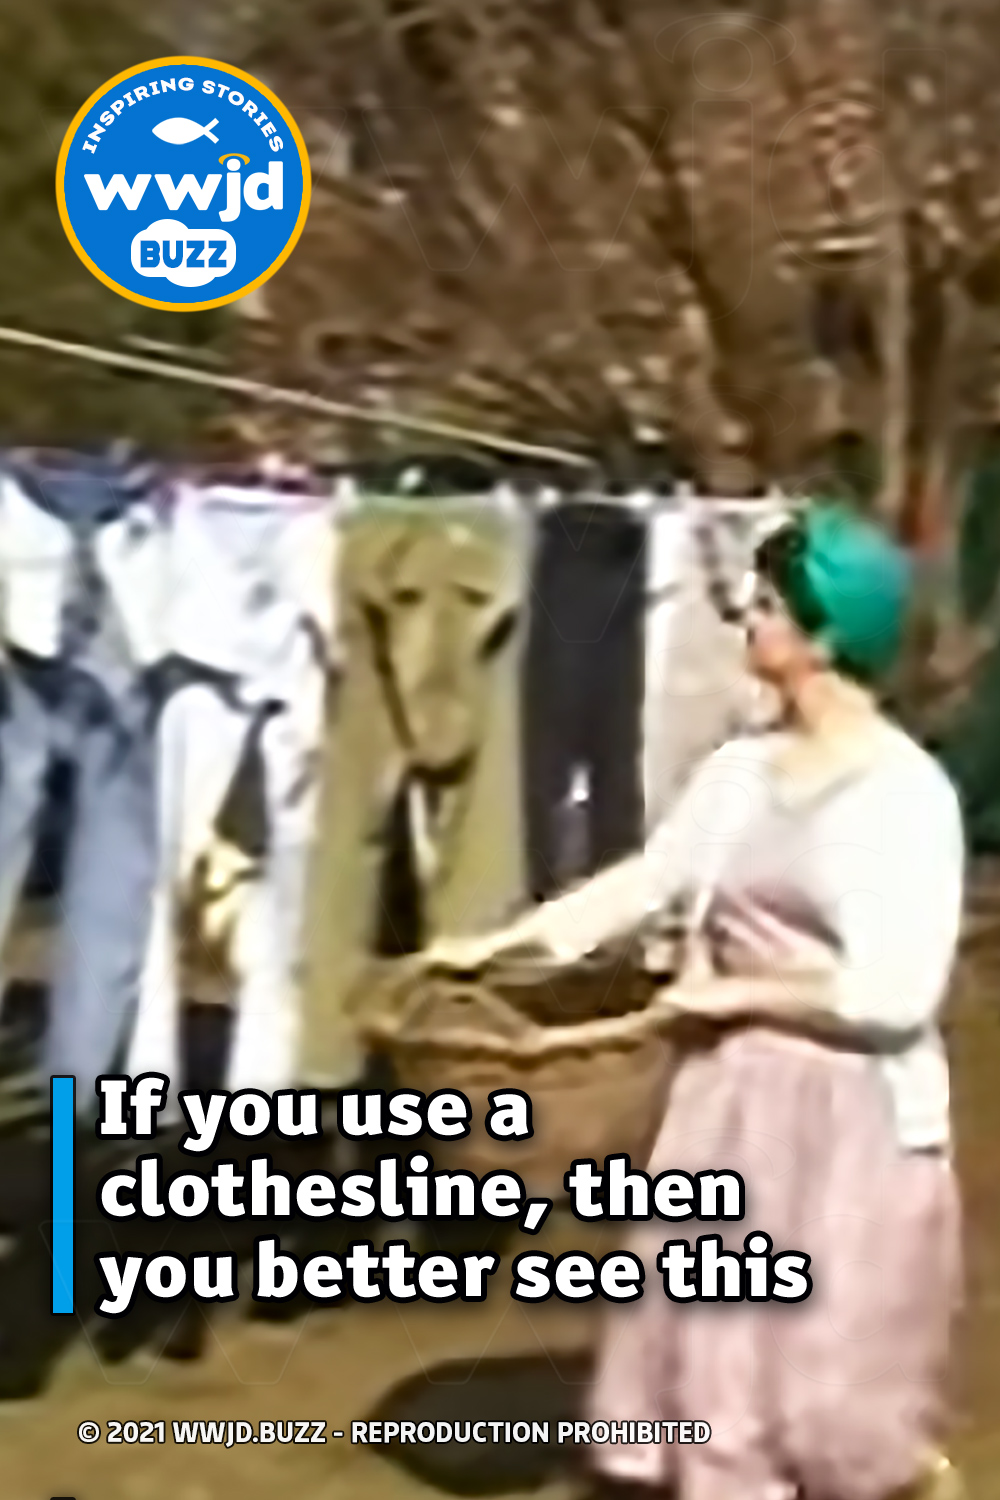 If you use a clothesline, then you better see this